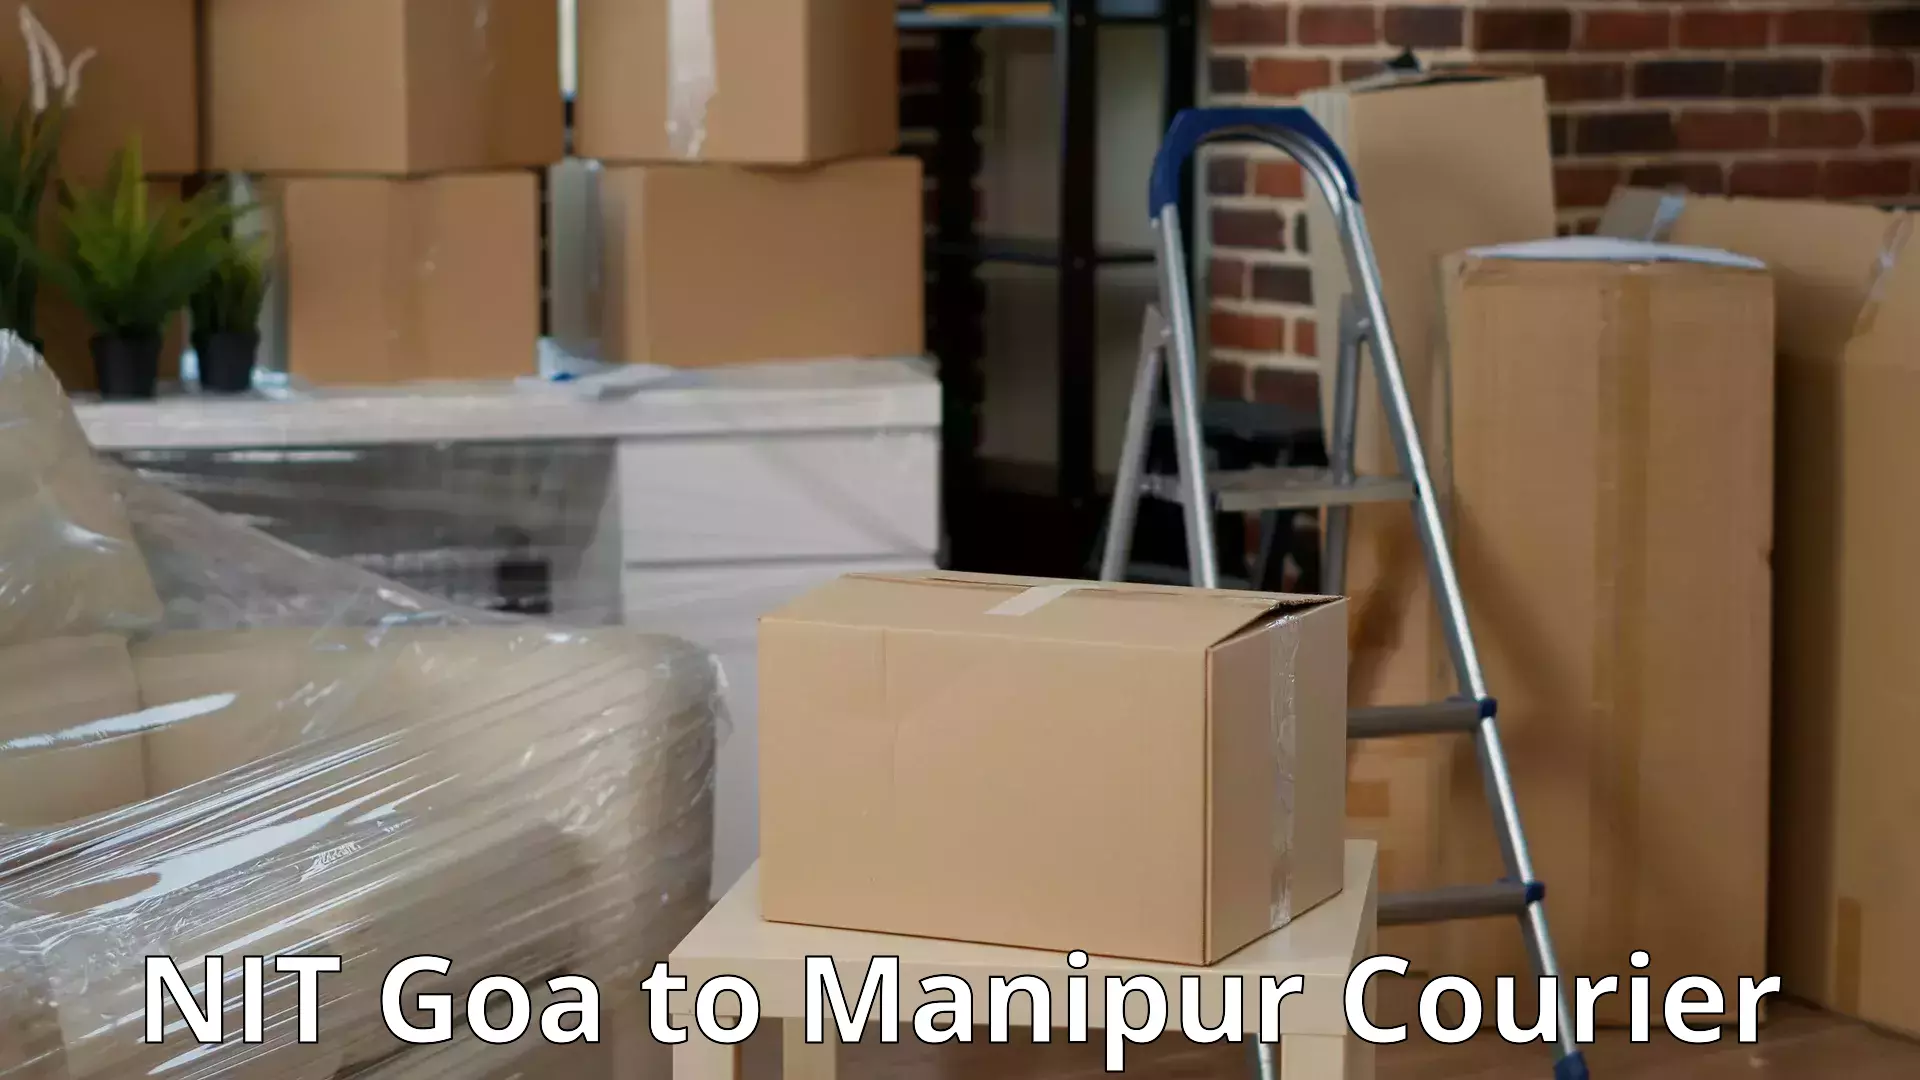 Quality moving services NIT Goa to Manipur